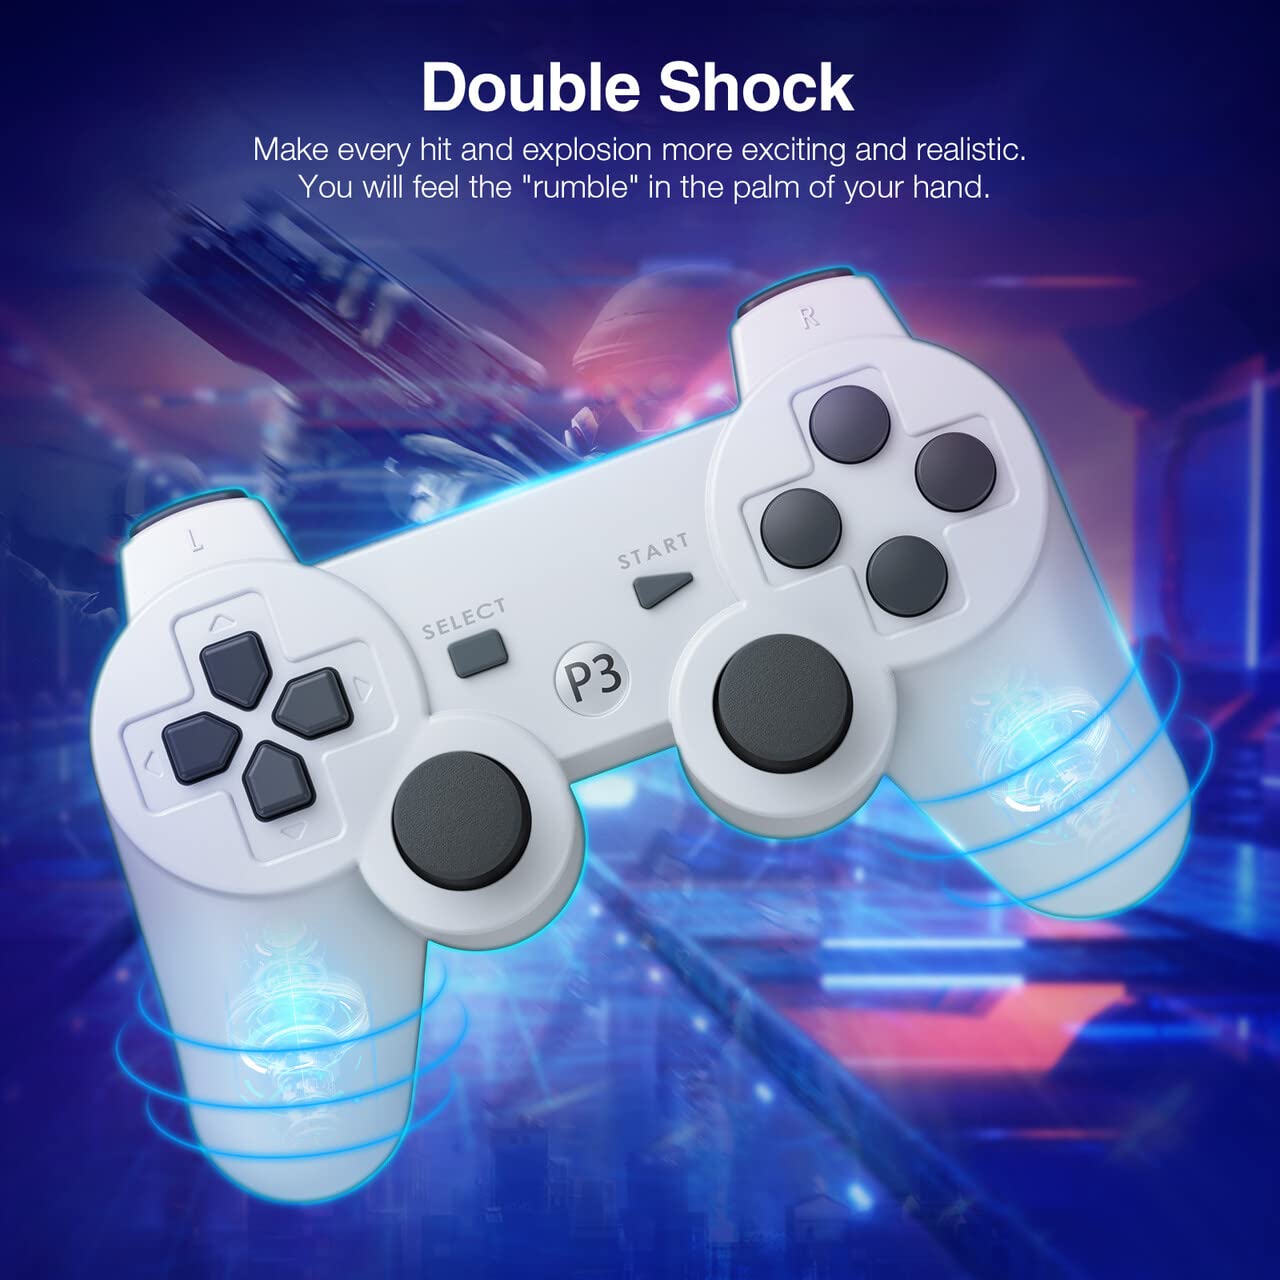 Powerextra PS-3 Wireless Controller Compatible with Play-Station 3, 2 Pack High Performance Gaming Controller with Upgraded Joystick Double Shock for Play-Station 3 (White)